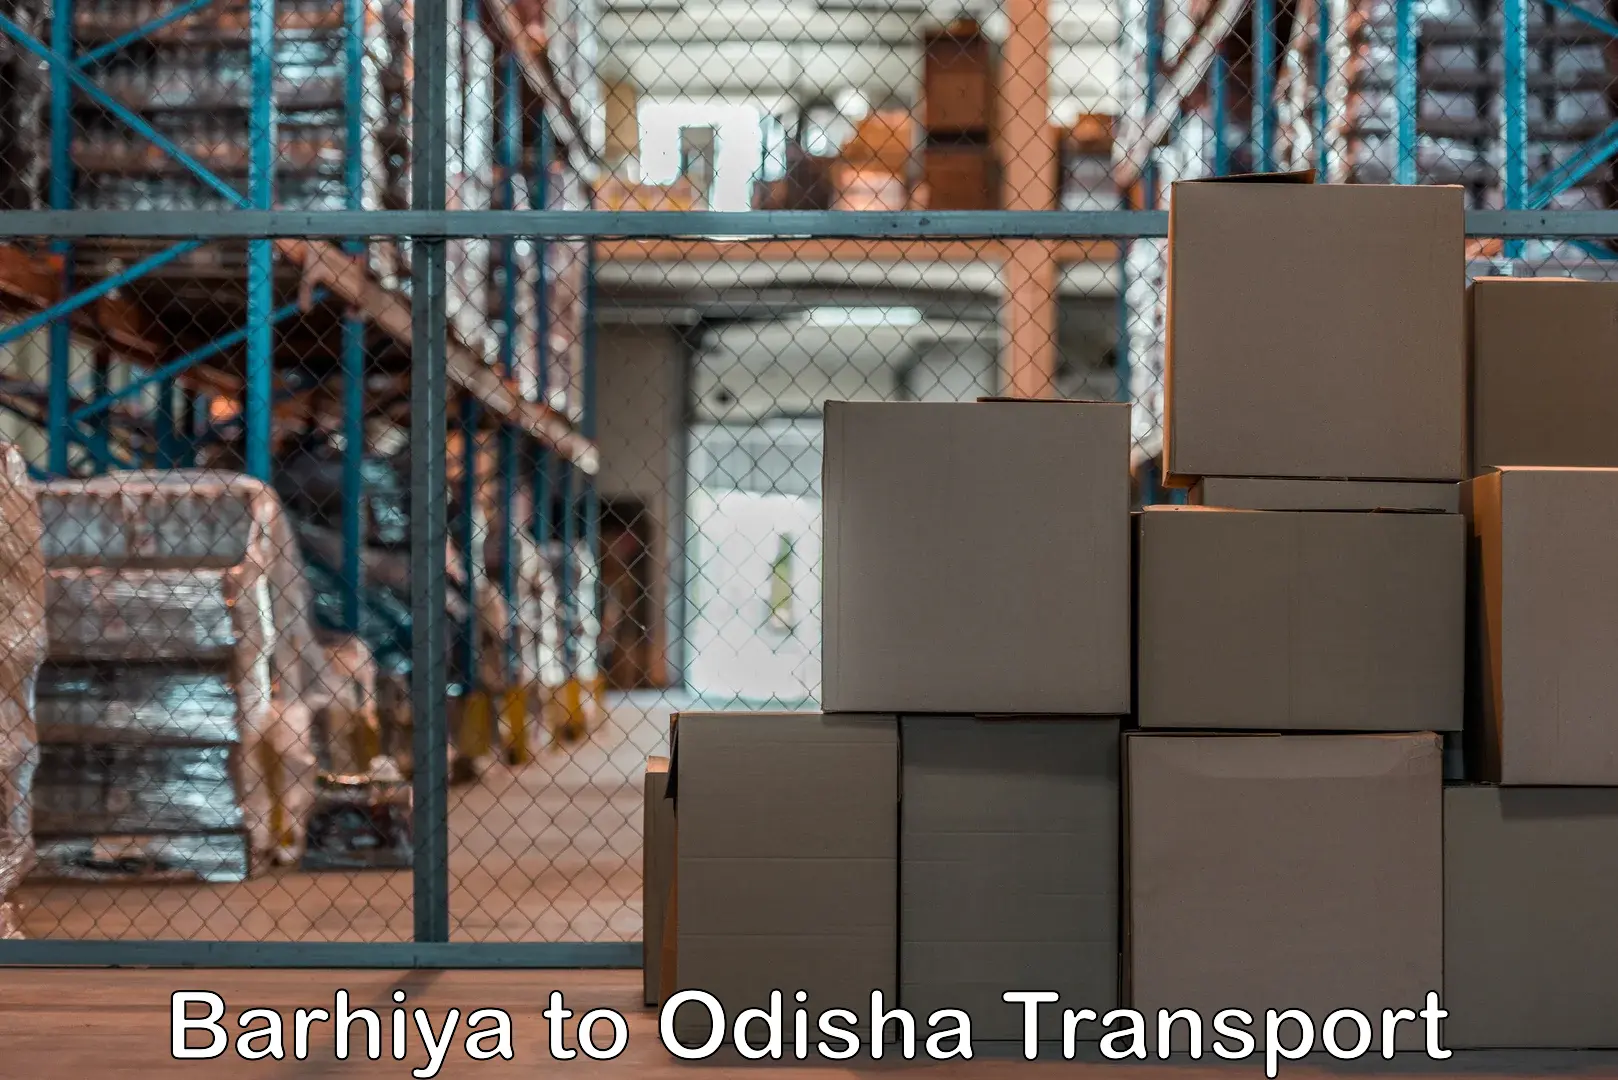 Transport shared services in Barhiya to Paradip Port